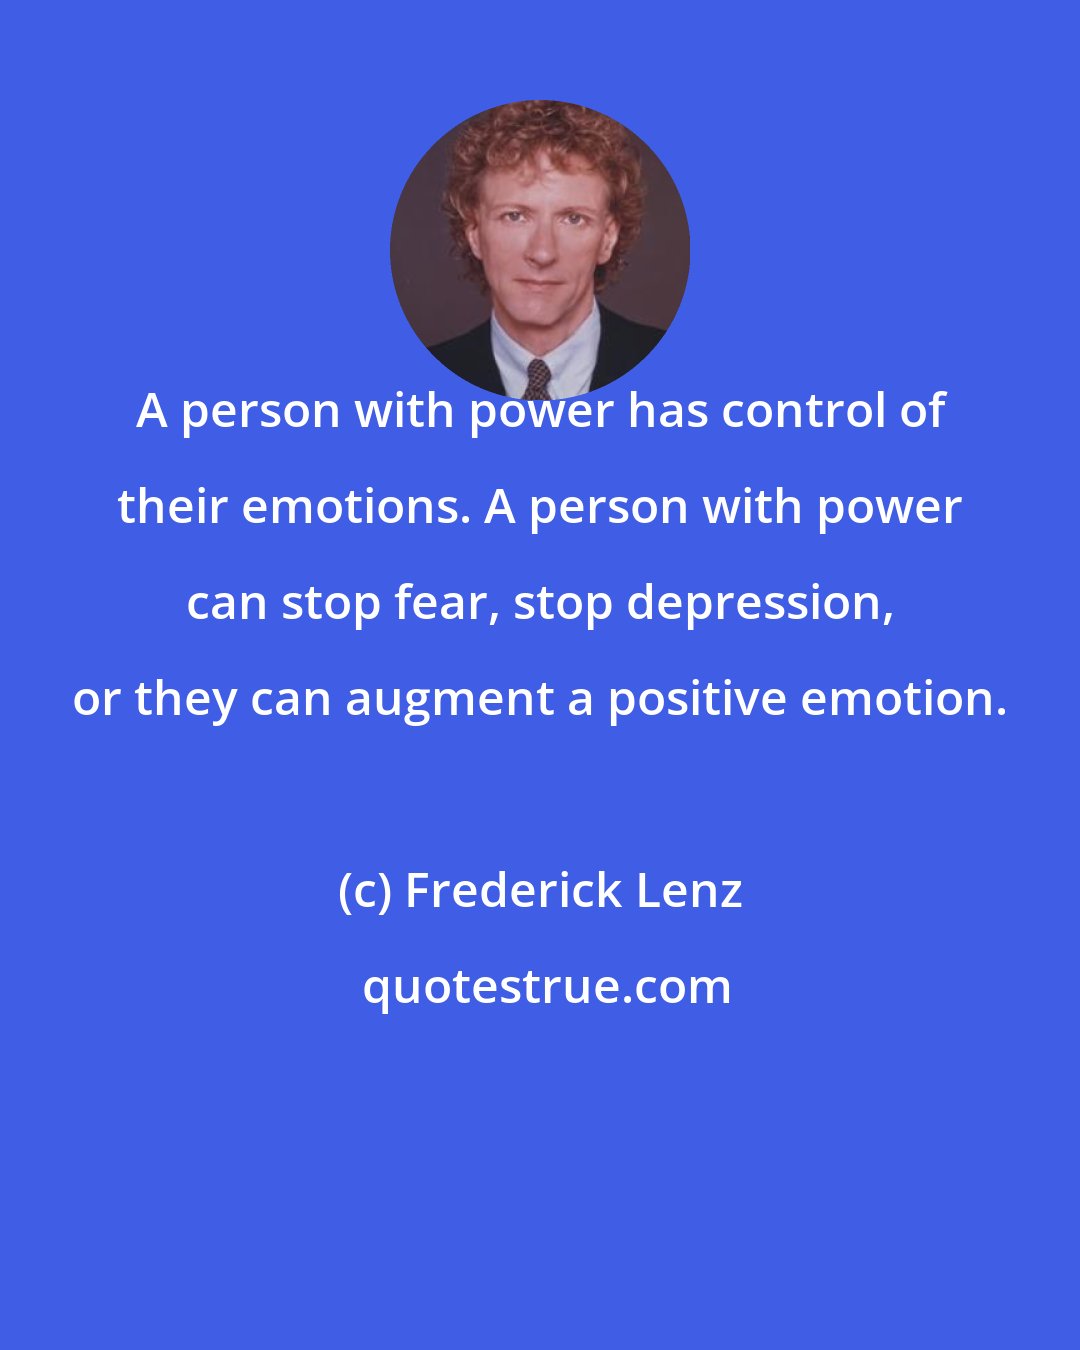 Frederick Lenz: A person with power has control of their emotions. A person with power can stop fear, stop depression, or they can augment a positive emotion.